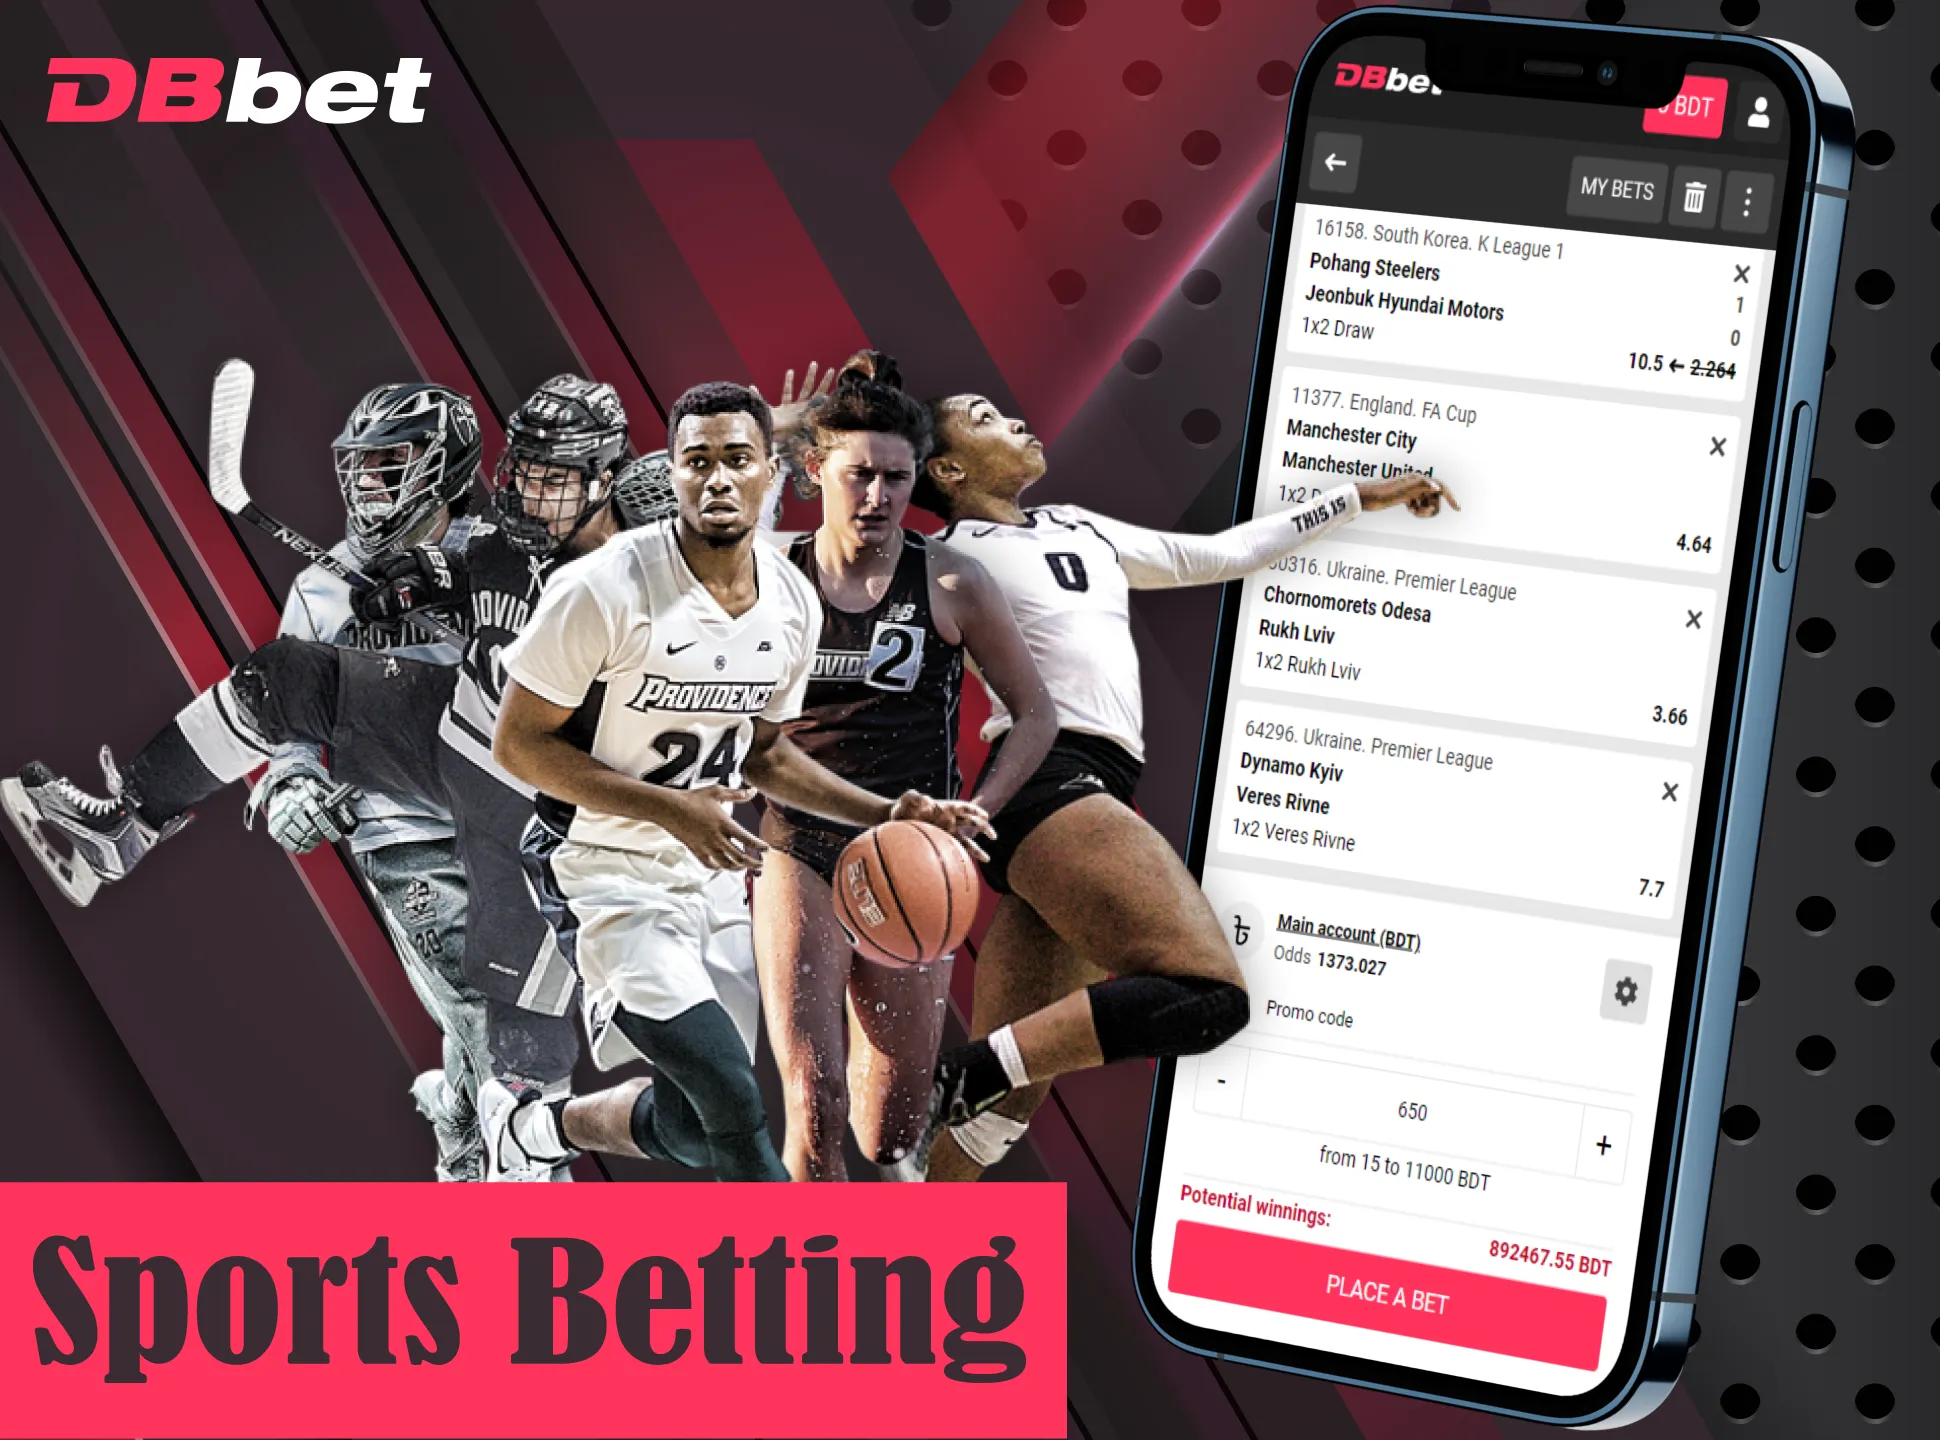 Bet on your favourite sports on DBbet betting page in app.